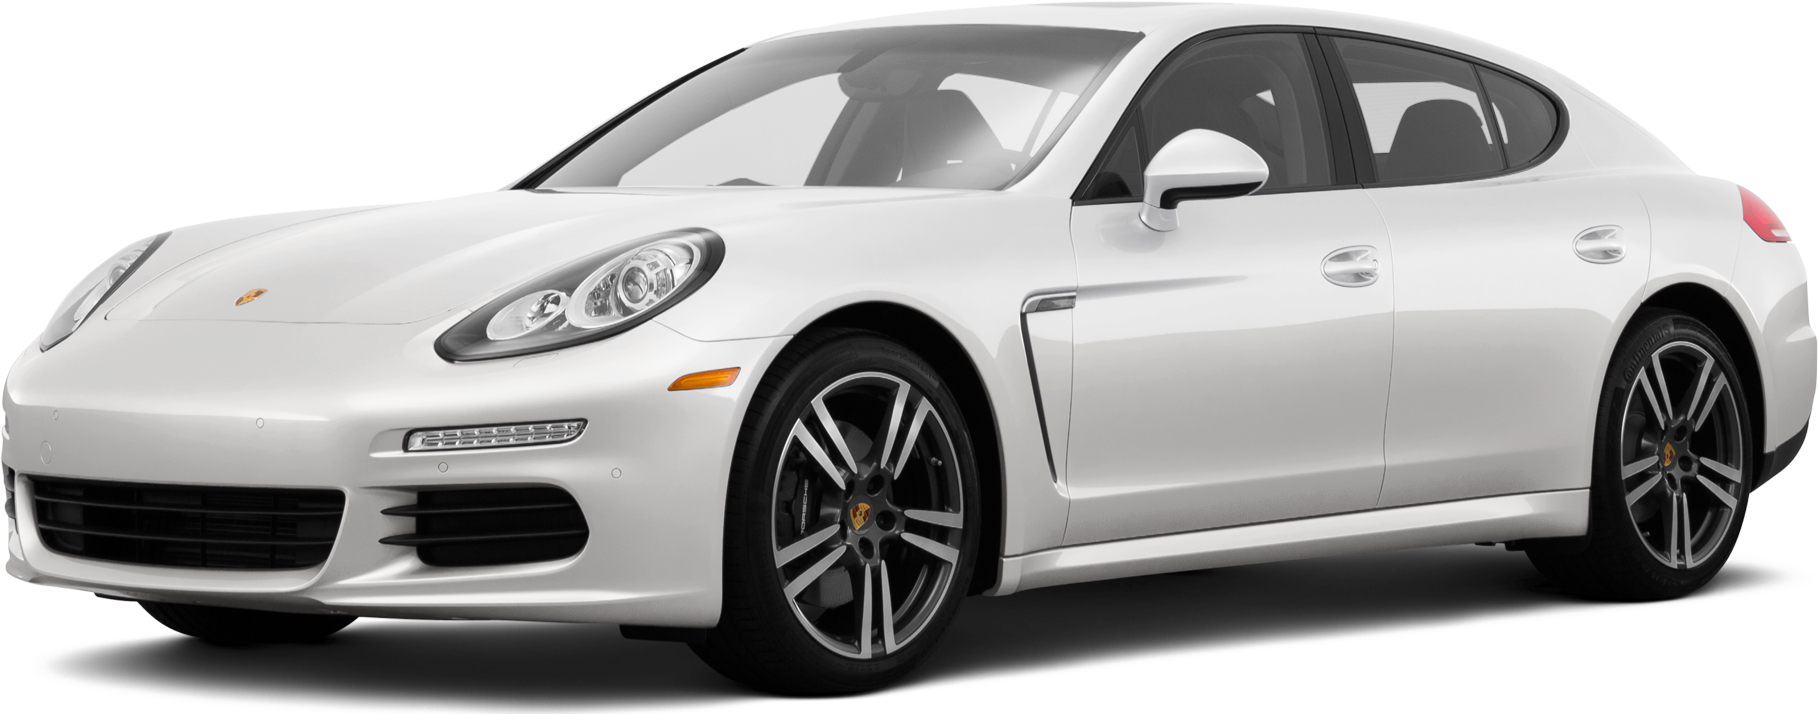 2016 Porsche Panamera Turbo Review Trims Specs Price New Interior  Features Exterior Design and Specifications  CarBuzz